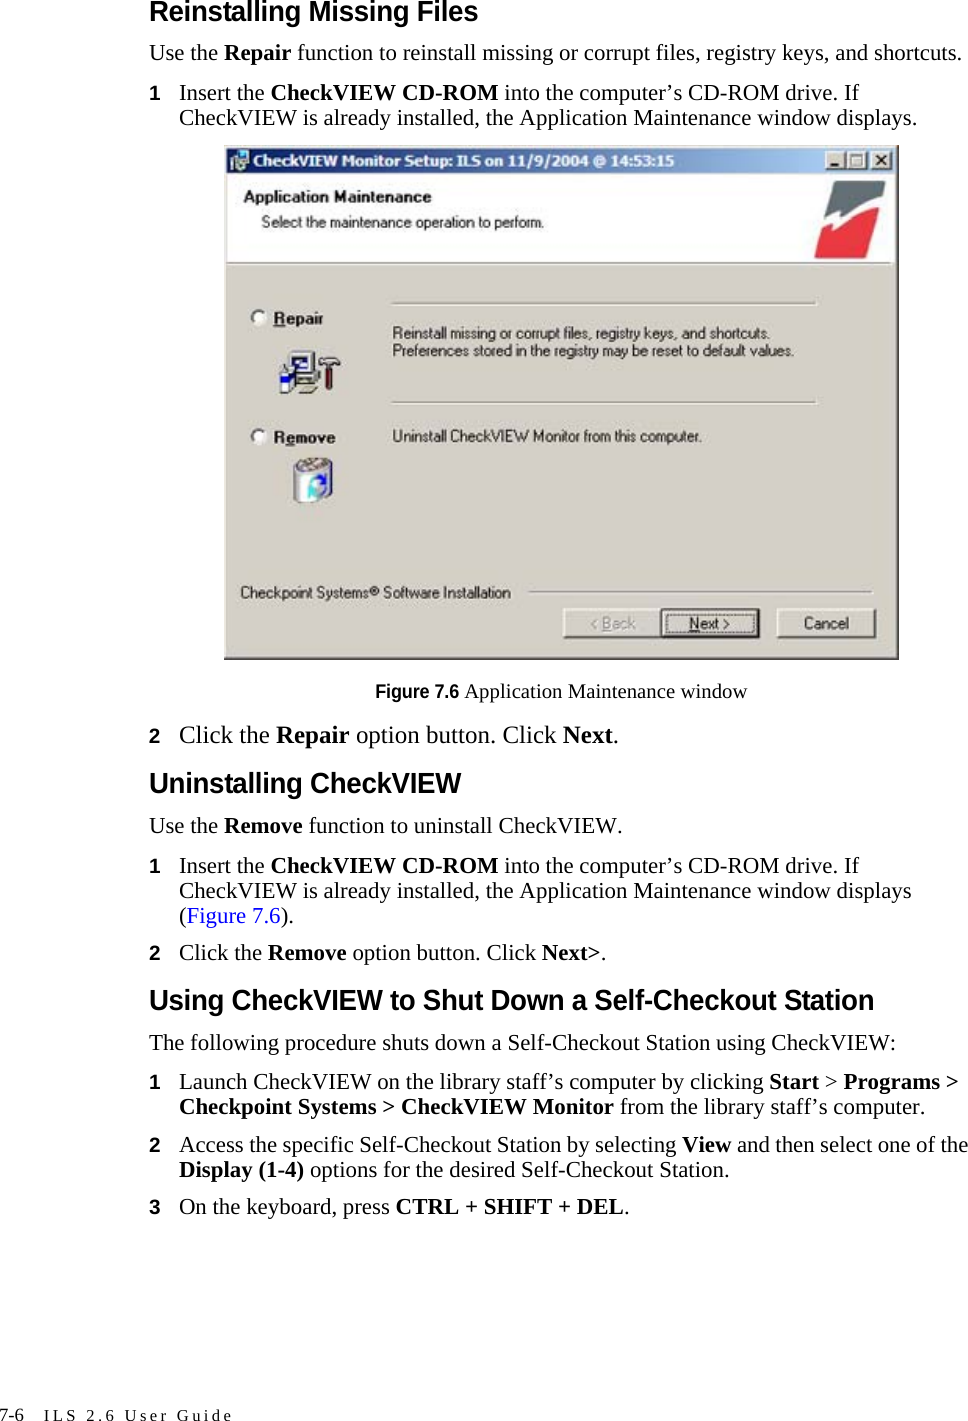 7-6 ILS 2.6 User GuideReinstalling Missing FilesUse the Repair function to reinstall missing or corrupt files, registry keys, and shortcuts.1Insert the CheckVIEW CD-ROM into the computer’s CD-ROM drive. If CheckVIEW is already installed, the Application Maintenance window displays.Figure 7.6 Application Maintenance window2Click the Repair option button. Click Next.Uninstalling CheckVIEWUse the Remove function to uninstall CheckVIEW. 1Insert the CheckVIEW CD-ROM into the computer’s CD-ROM drive. If CheckVIEW is already installed, the Application Maintenance window displays (Figure 7.6).2Click the Remove option button. Click Next&gt;.Using CheckVIEW to Shut Down a Self-Checkout StationThe following procedure shuts down a Self-Checkout Station using CheckVIEW:1Launch CheckVIEW on the library staff’s computer by clicking Start &gt; Programs &gt; Checkpoint Systems &gt; CheckVIEW Monitor from the library staff’s computer. 2Access the specific Self-Checkout Station by selecting View and then select one of the Display (1-4) options for the desired Self-Checkout Station.3On the keyboard, press CTRL + SHIFT + DEL. 